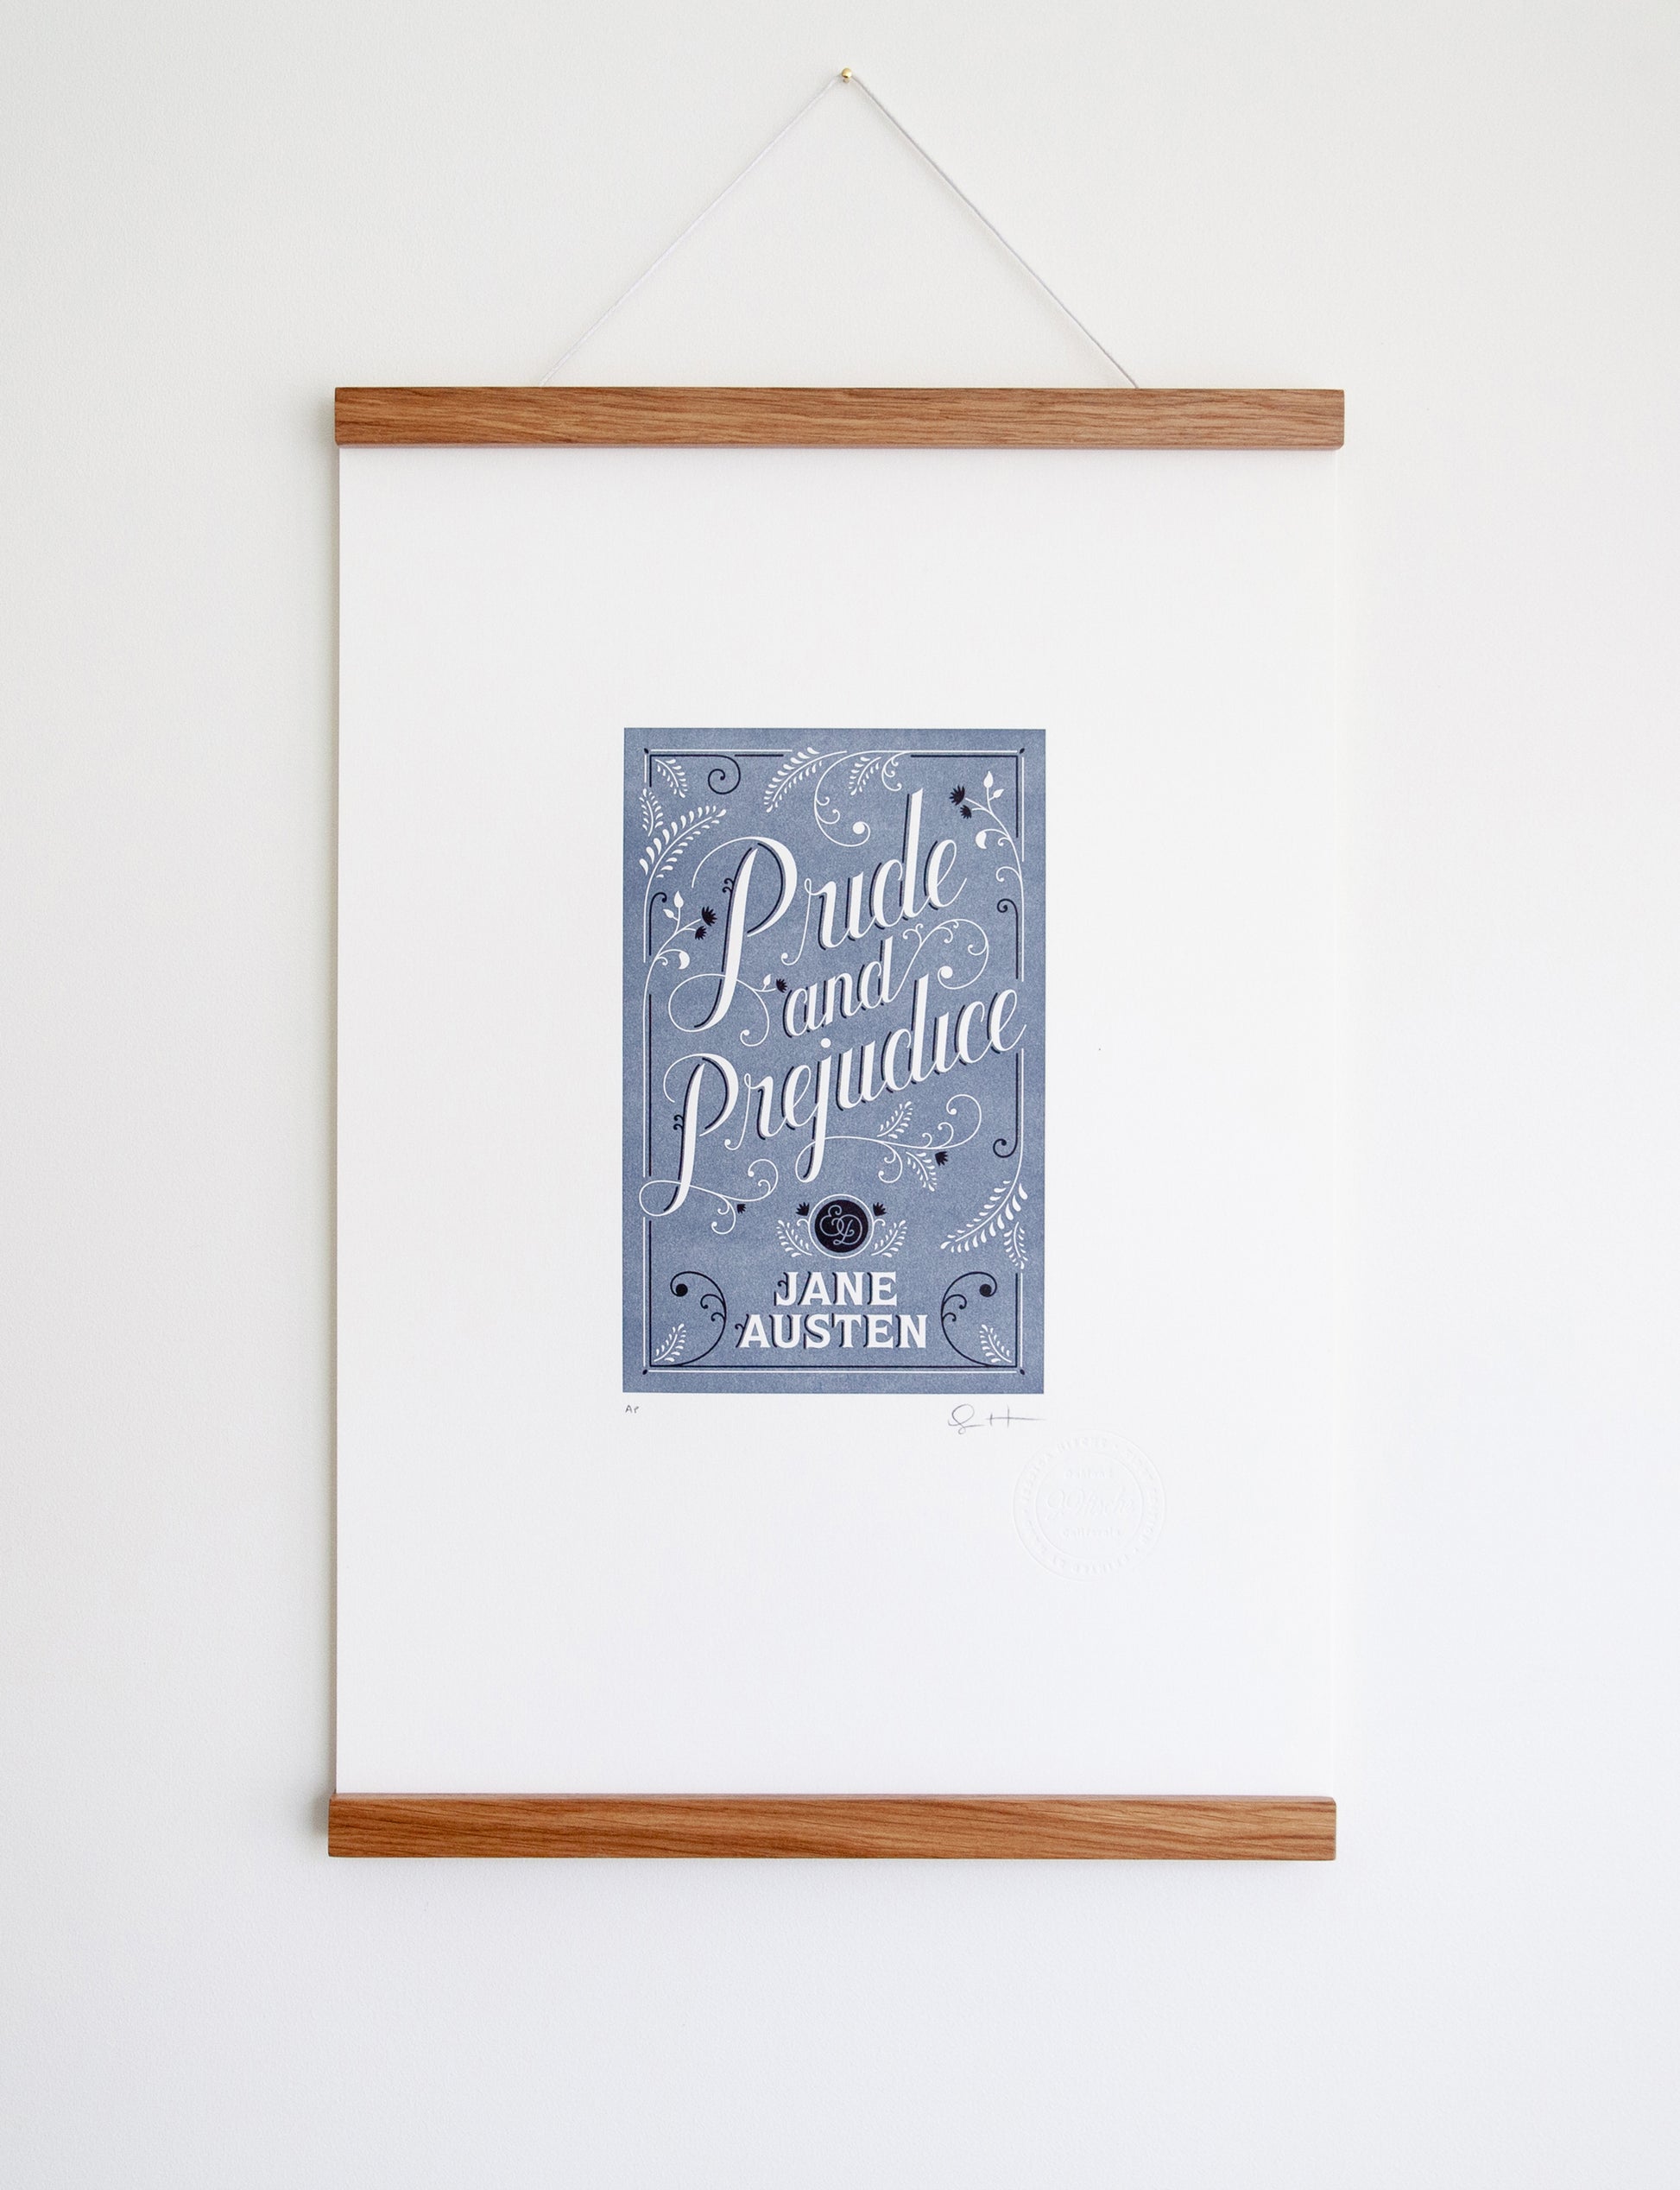 Framed 2-color letterpress print in blue and black. Printed artwork is an illustrated book cover of Pride and Prejudice including custom hand lettering.